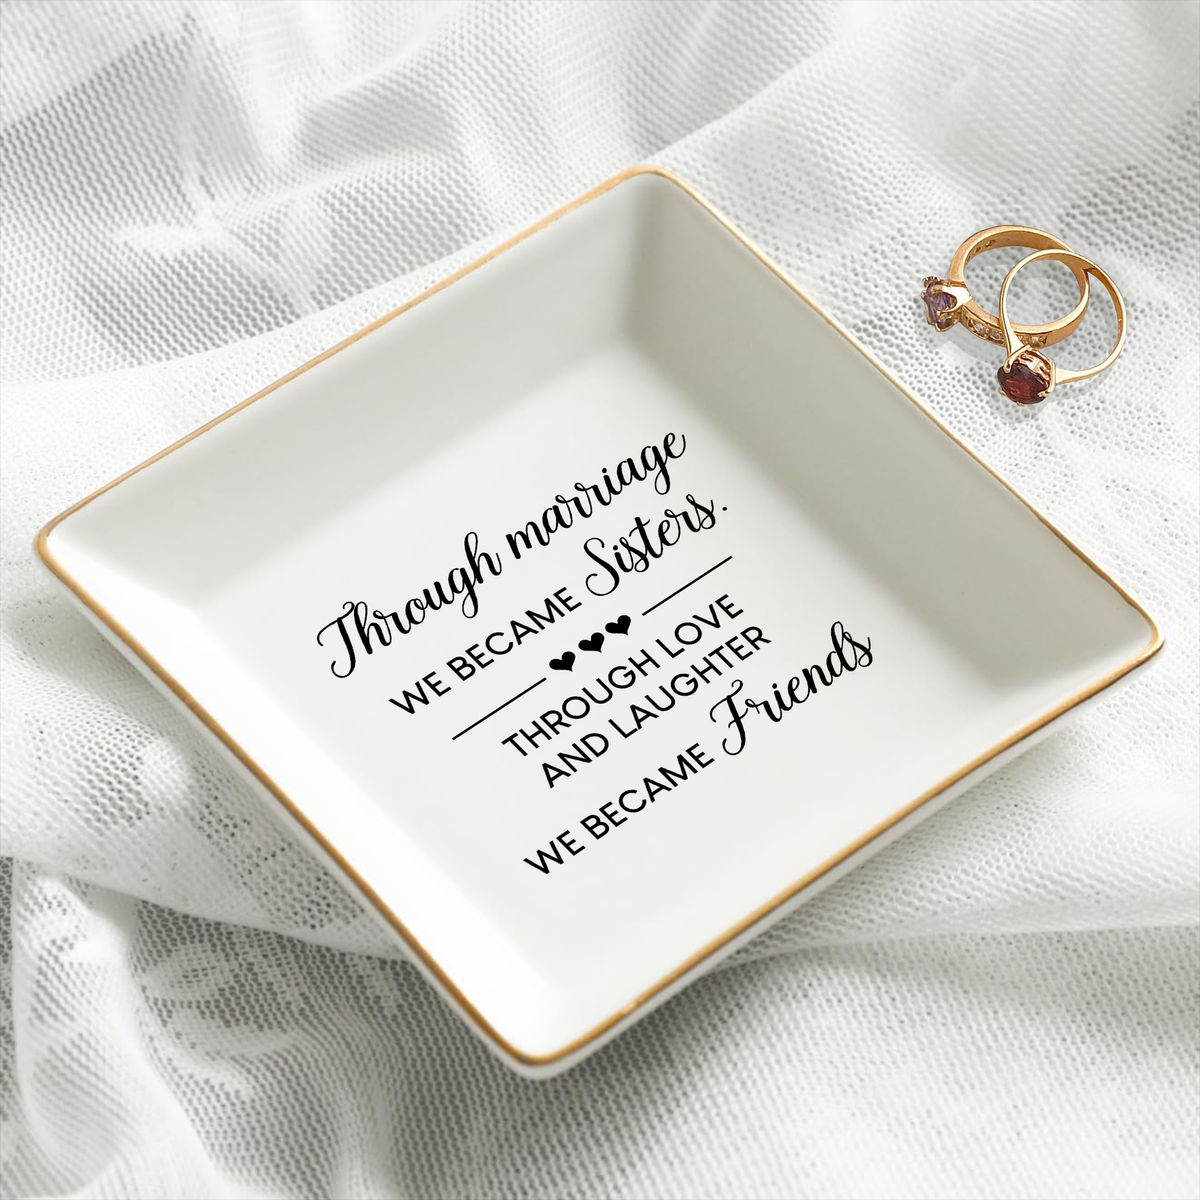 Jewelry Tray - Birthday Gift for for Sister Friend Bestie, Wedding Gifts For Bride, Bridesmaid -  Through marriage we became Sisters._1